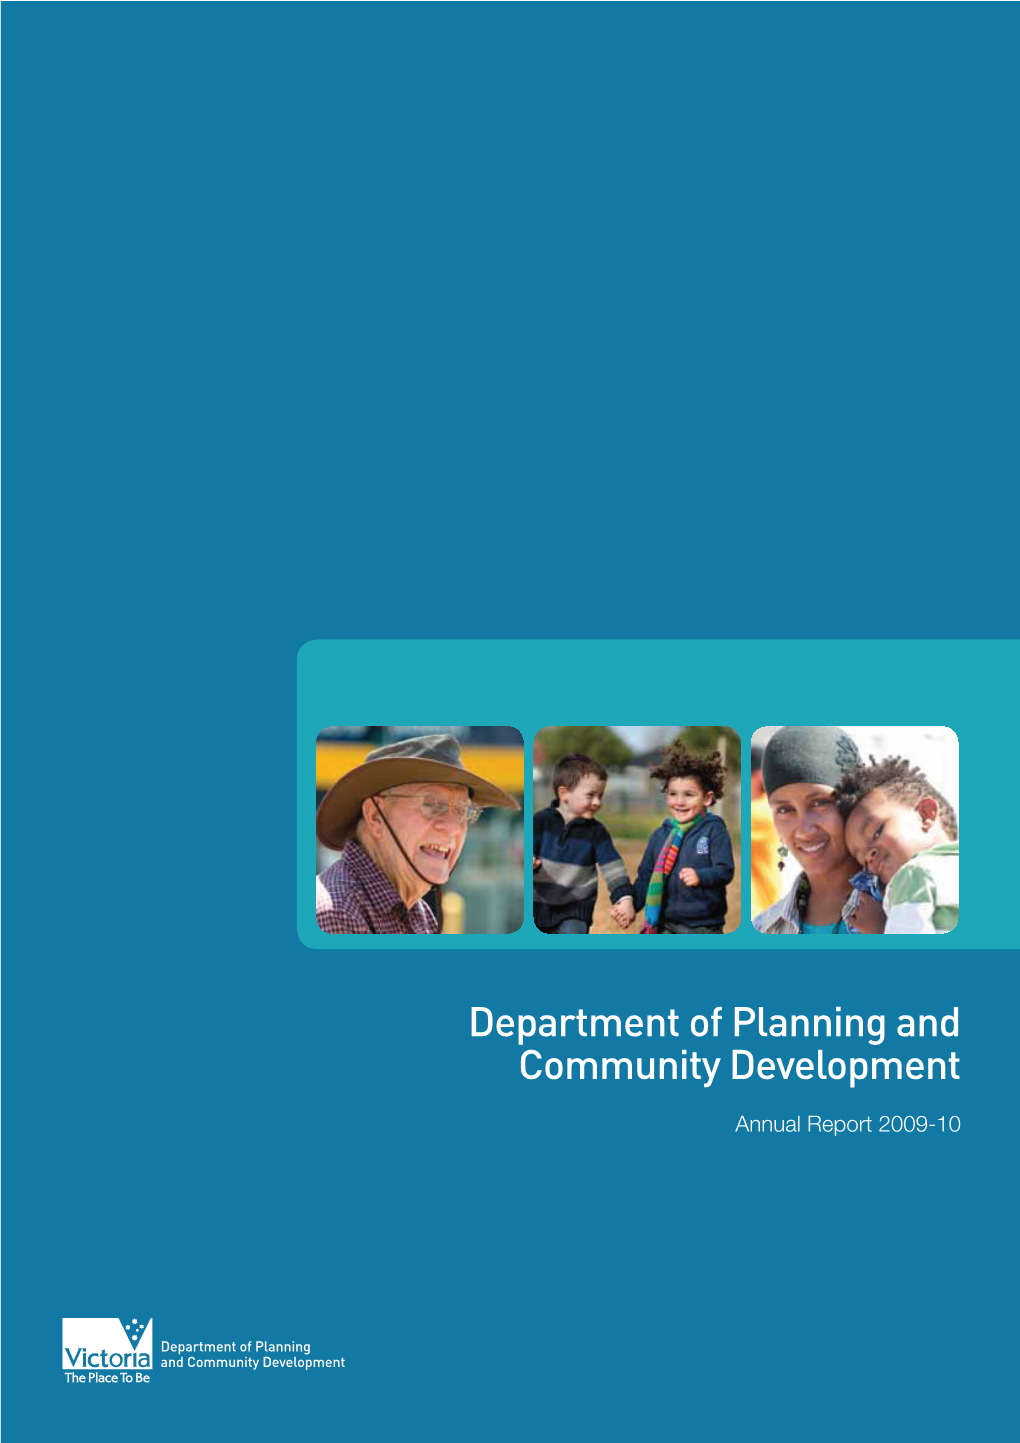 Department of Planning and Community Development